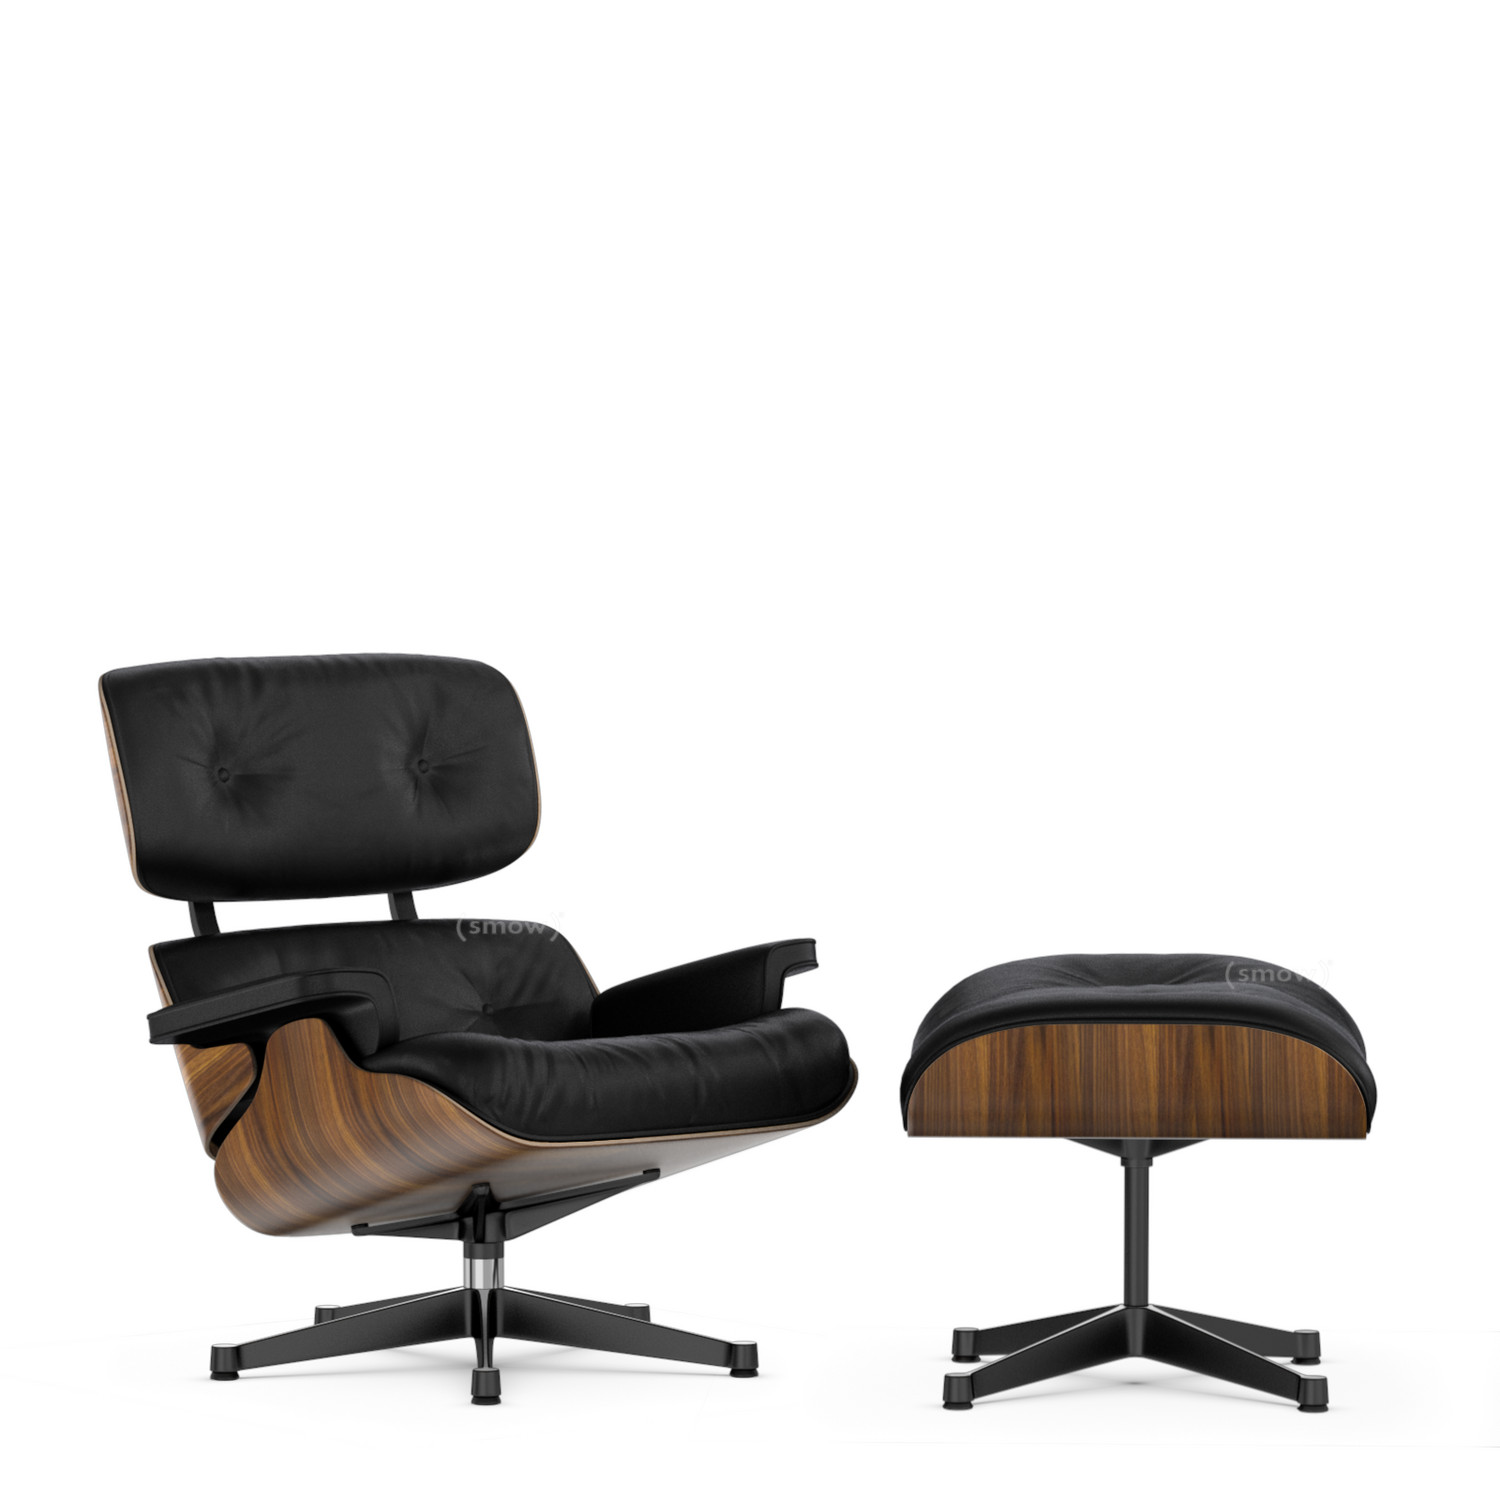 Gezamenlijk speer pak Vitra Lounge Chair & Ottoman by Charles & Ray Eames, 1956 - Designer  furniture by smow.com